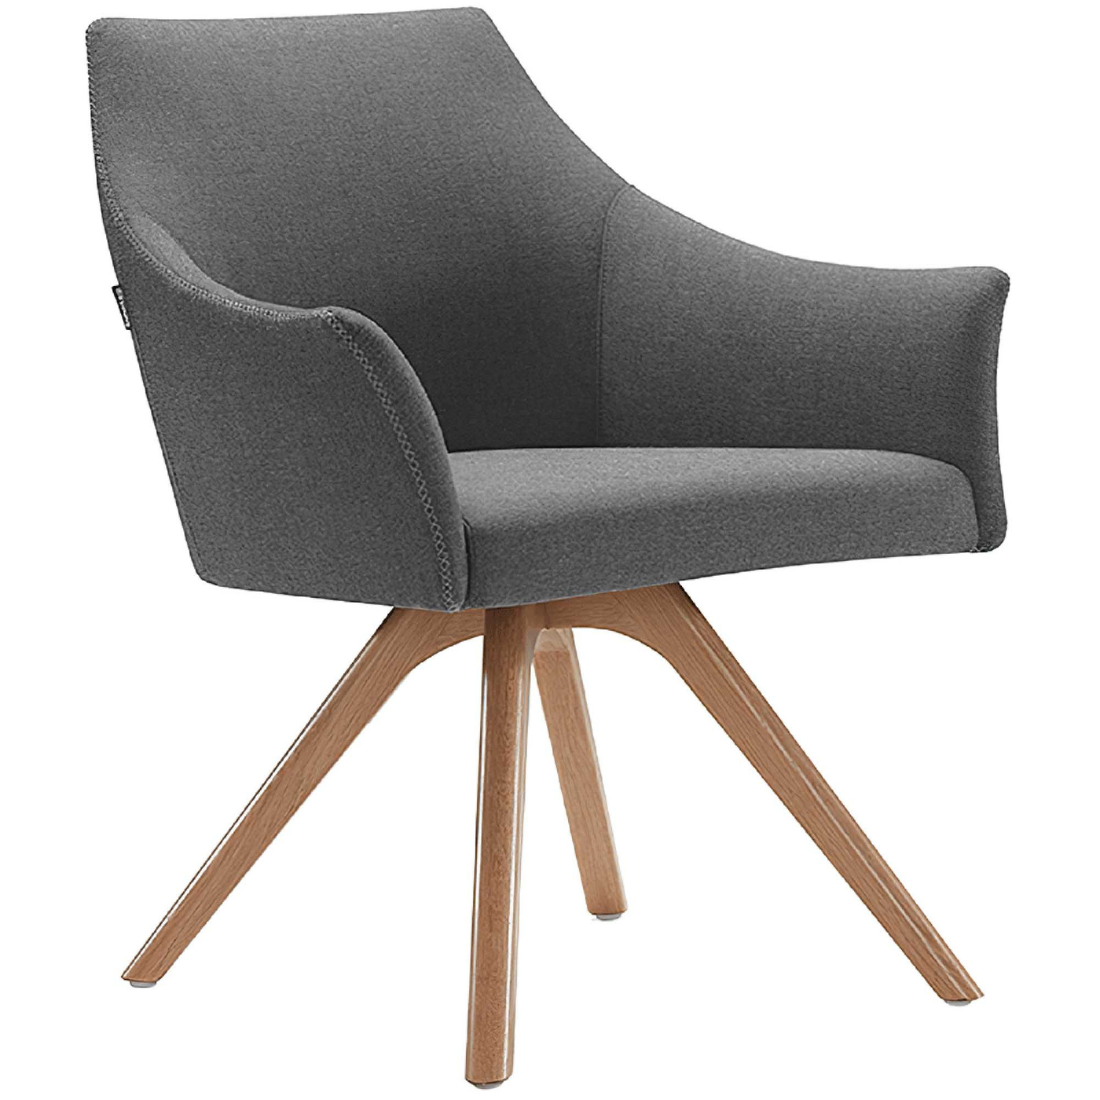 Tulip Tub Chair Wooden Legs - SWITCH OFFICE